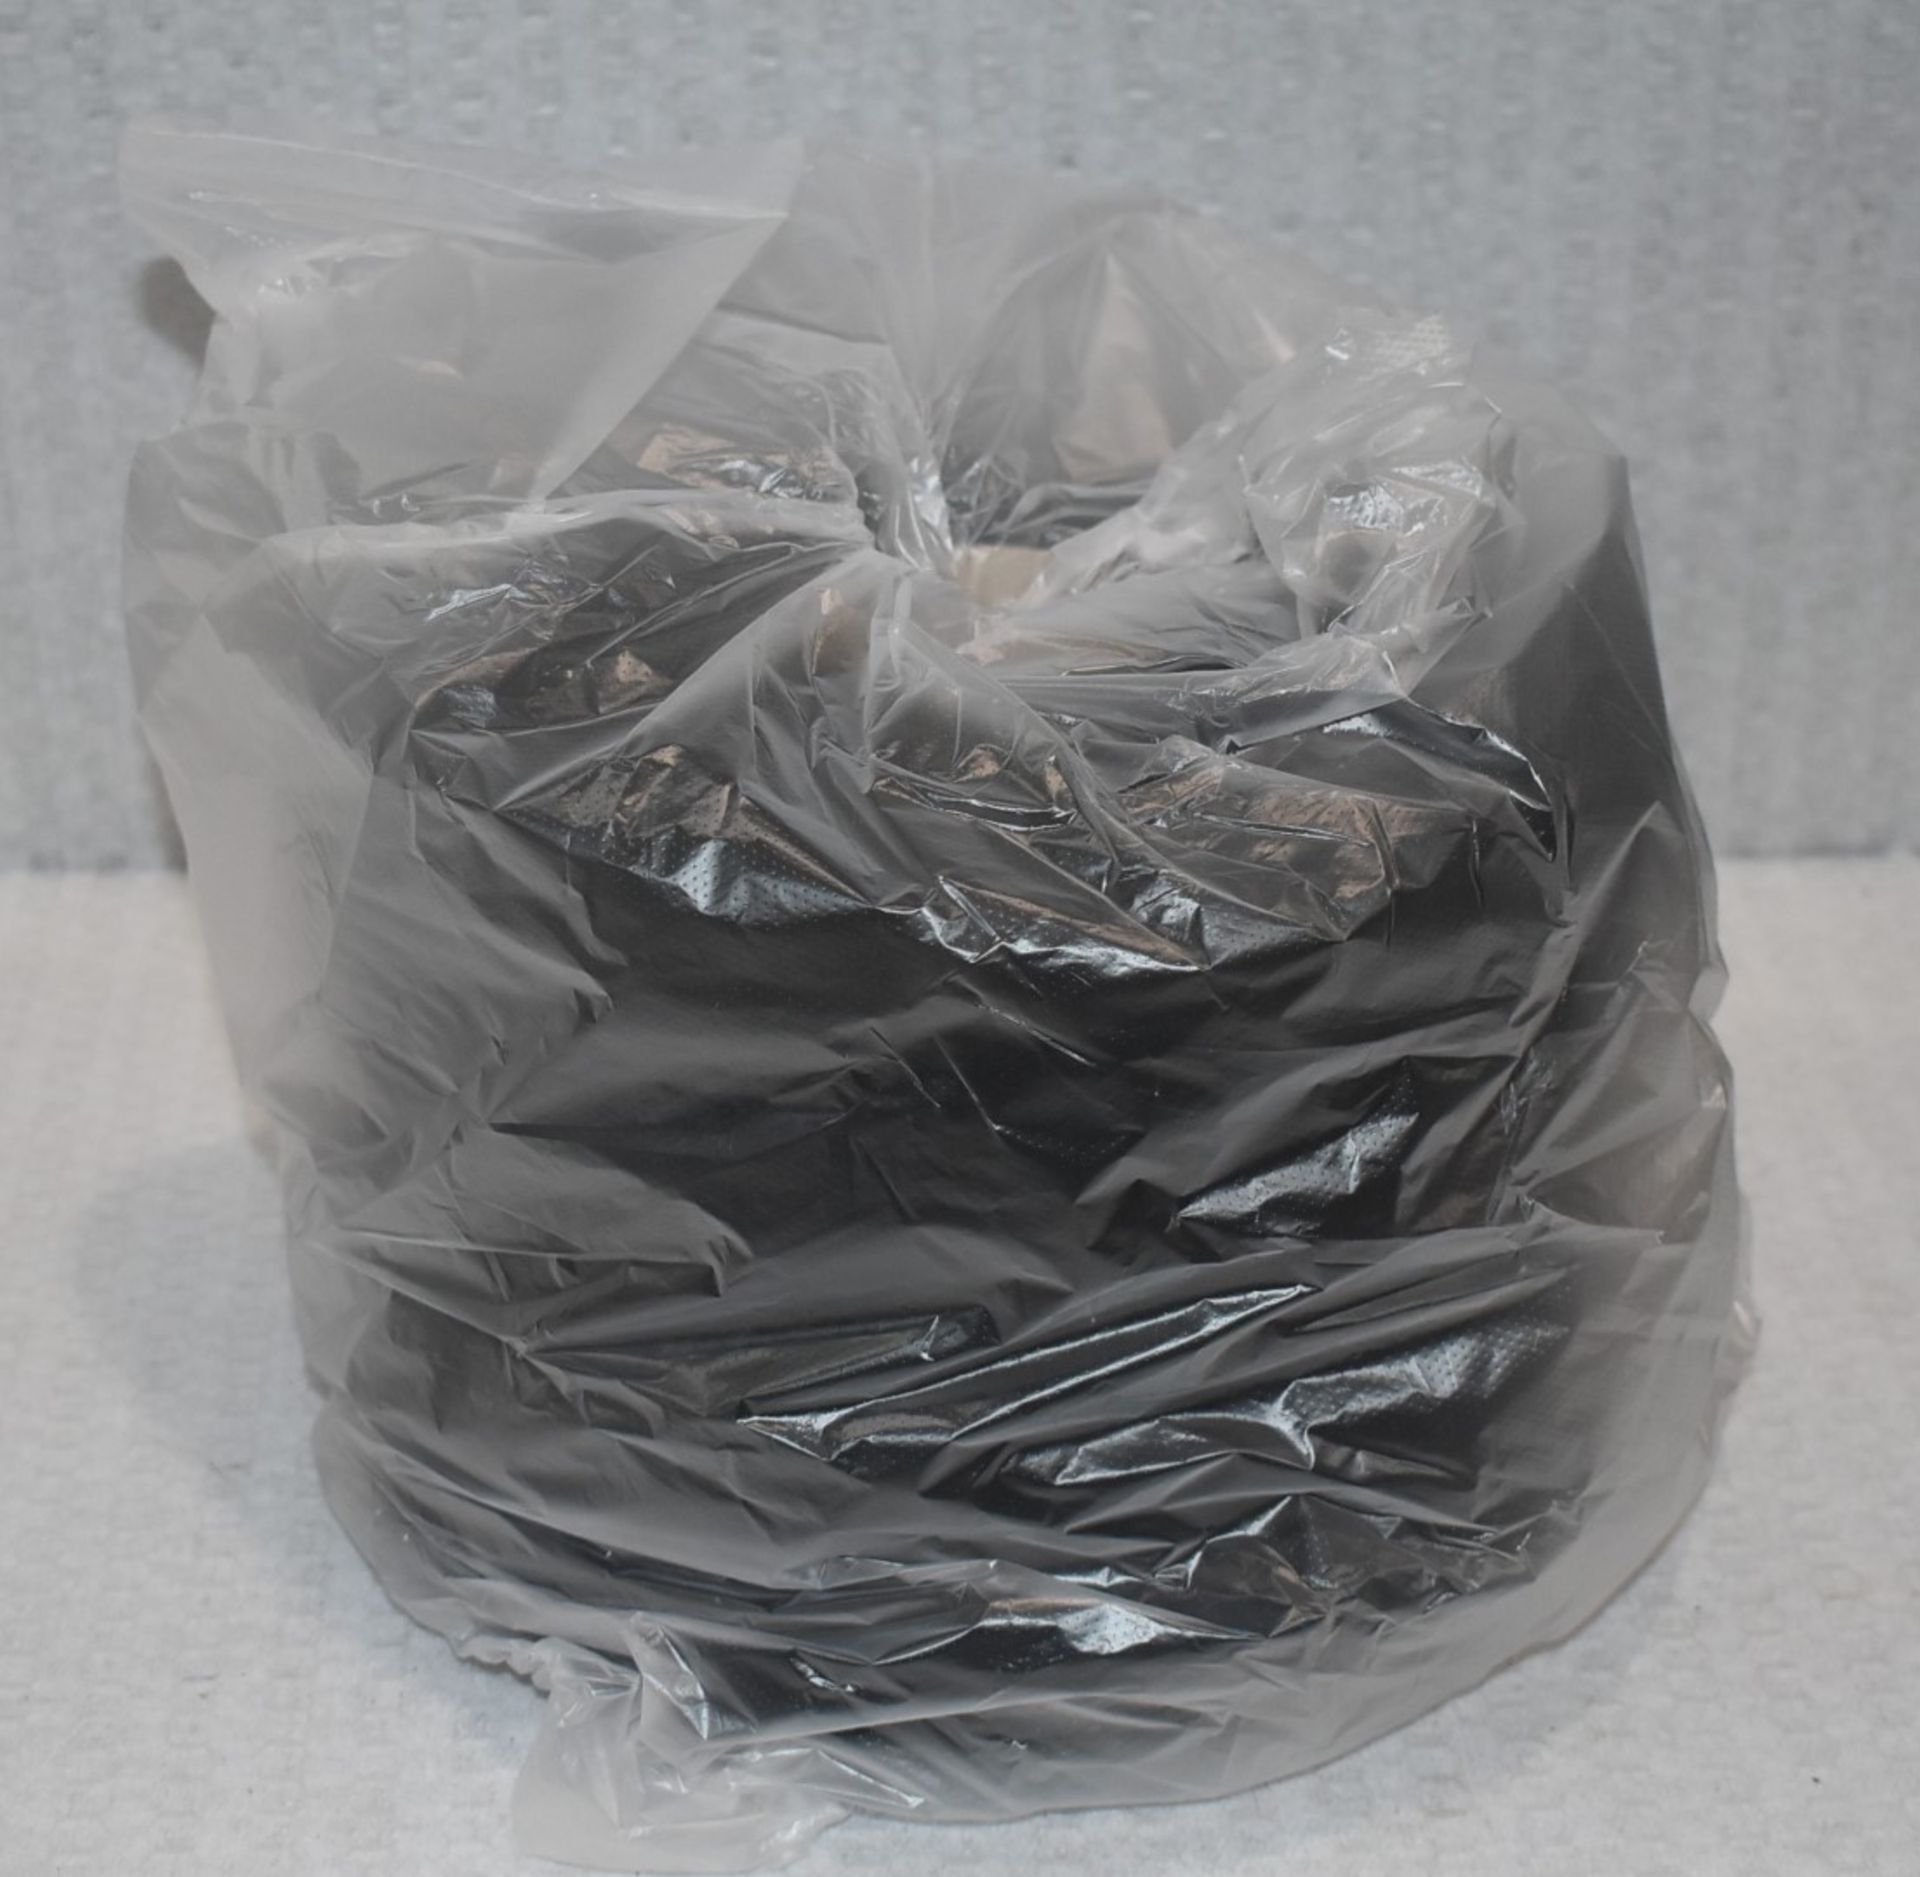 1 x Cone of 1/7,5 Lagona Knitting Yarn - Charcoal - Approx Weight: 2,300g - New Stock ABL Yarn - Image 4 of 10